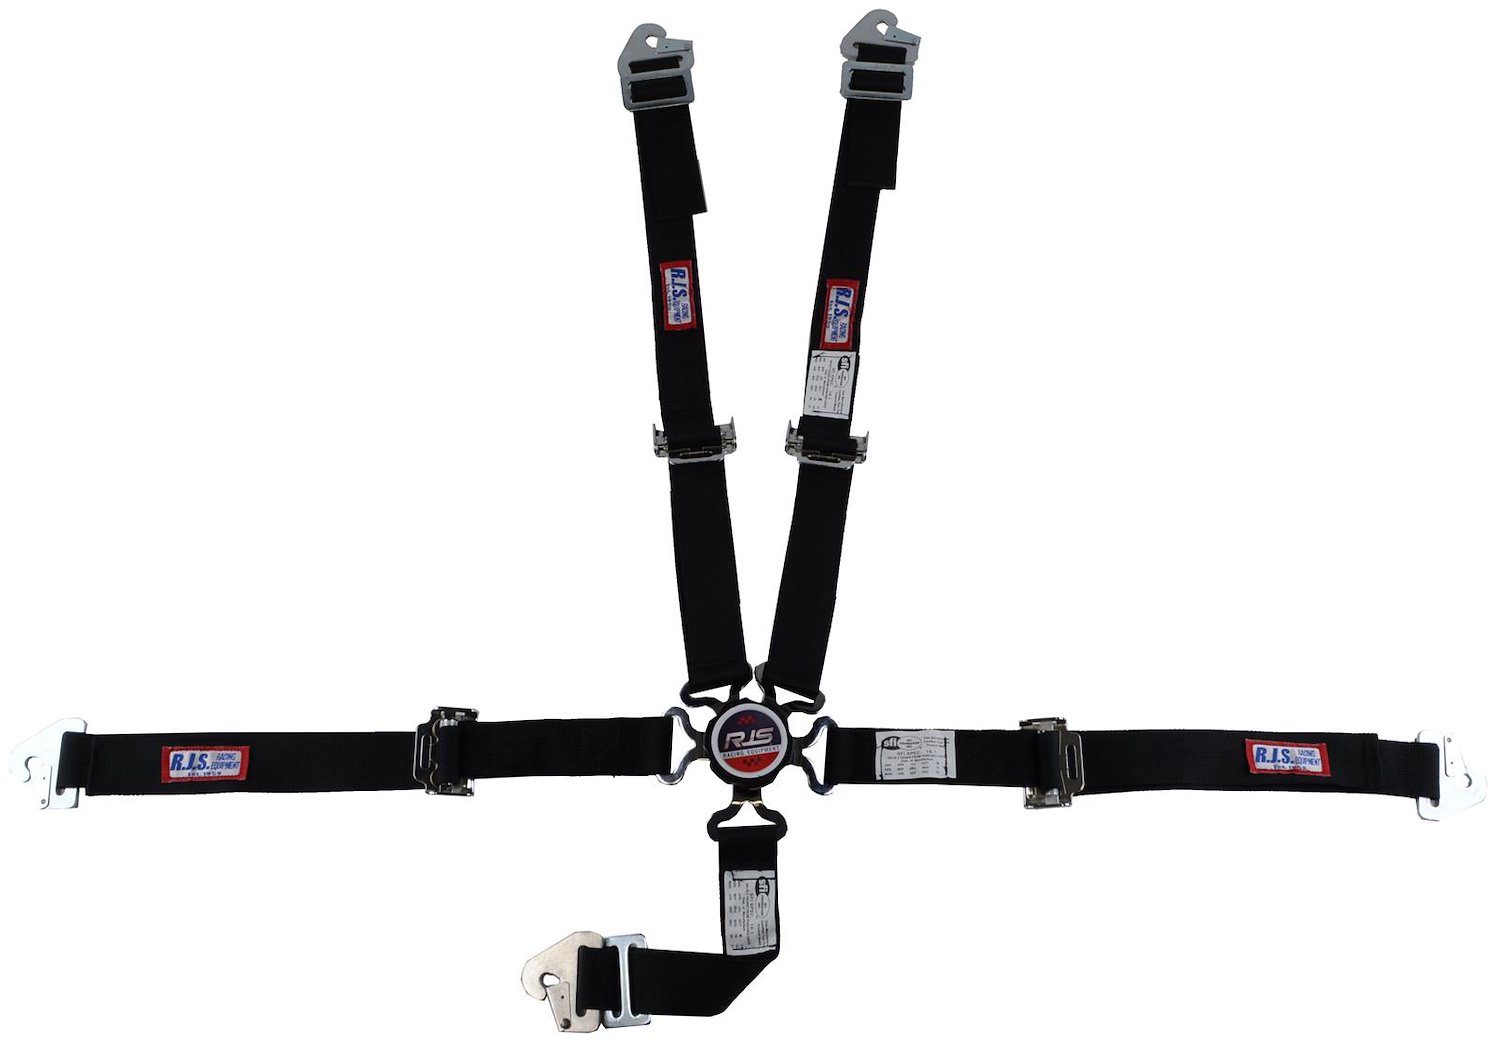 SFI 16.1 CAM-LOCK HARNESS 2 PULL UP Lap Belt 2 Shoulder Harness U ROLL BAR Mount 2 DOUBLE Sub ALL WRAP ENDS HOT PINK